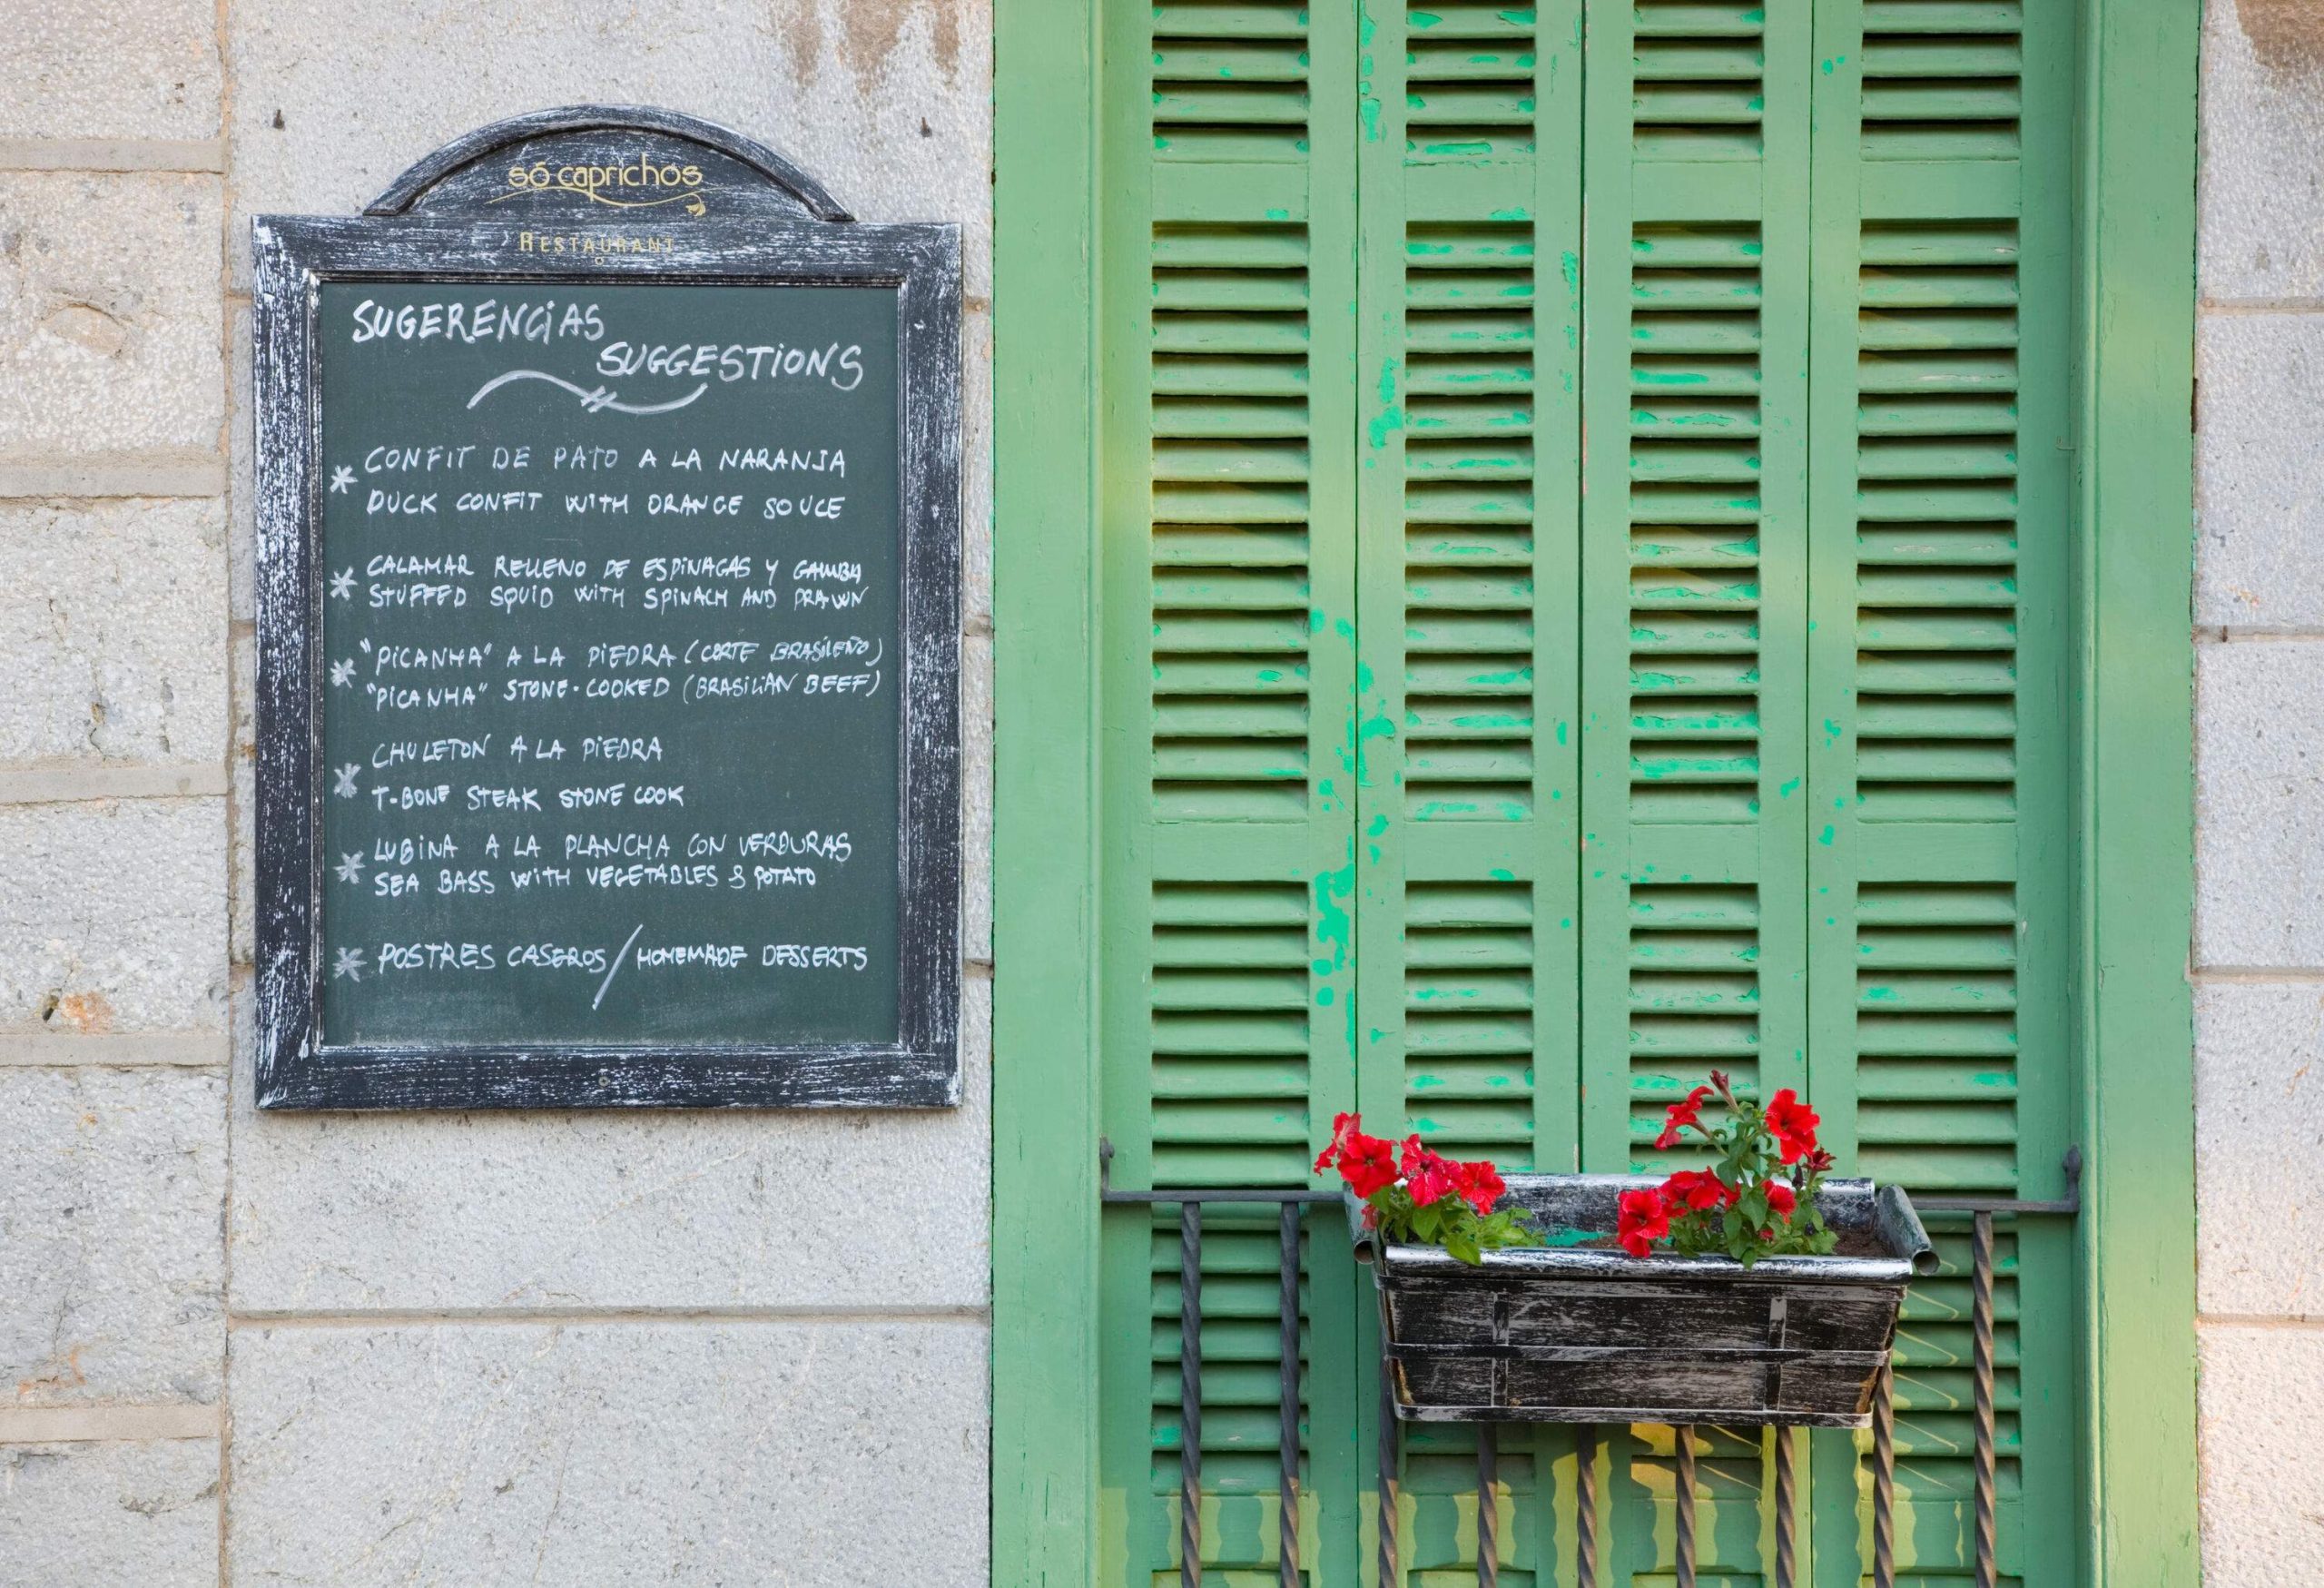 A wooden sign menu board on the wall next to a green window with red flowers on a black plant pot.